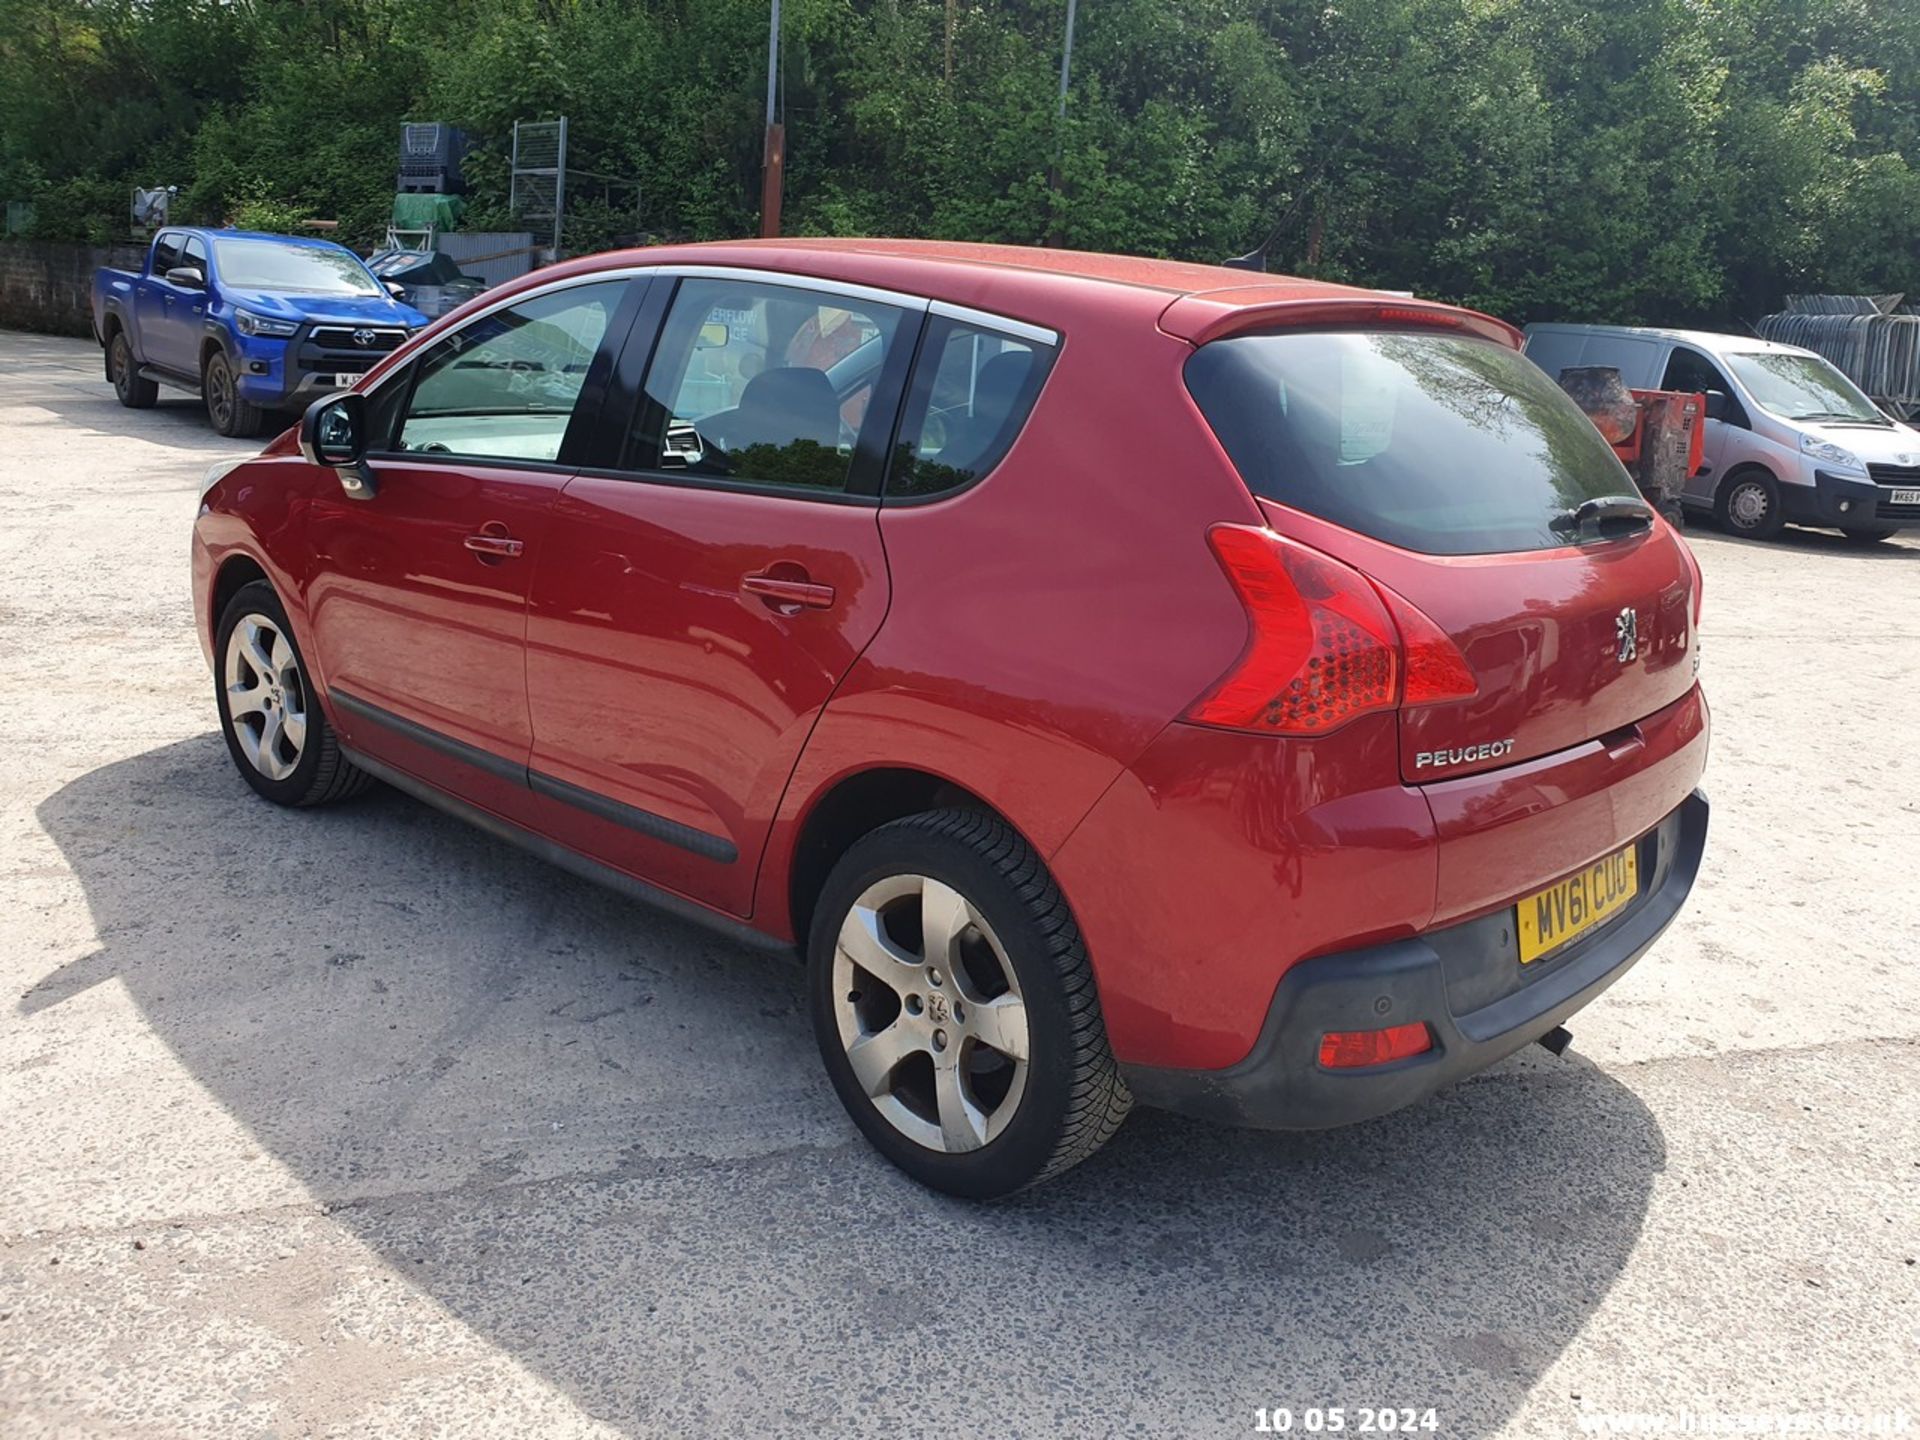 11/61 PEUGEOT 3008 SPORT E-HDI S-A - 1560cc 5dr Hatchback (Red, 89k) - Image 16 of 49